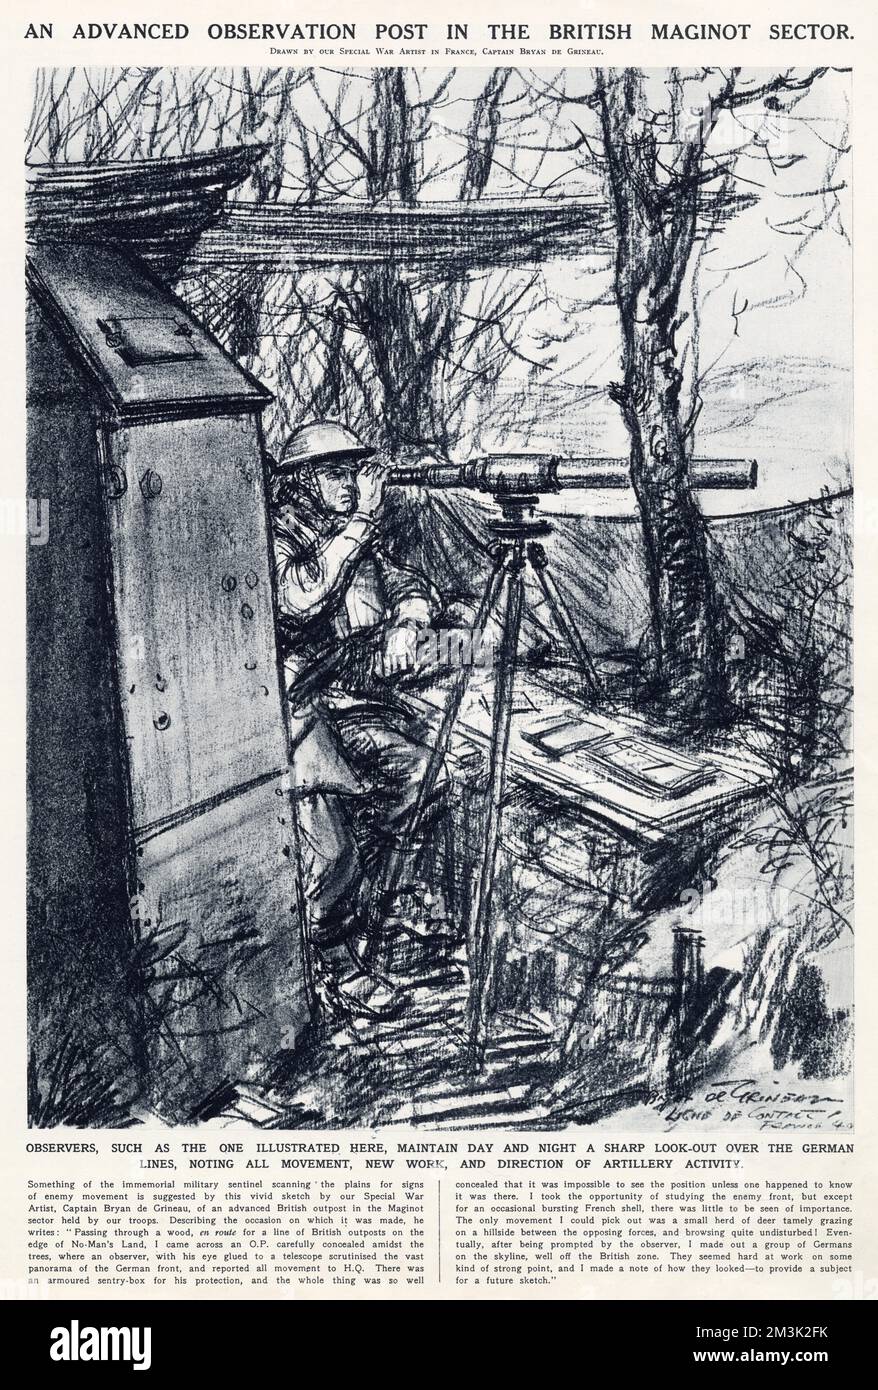 Drawing showing an advanced Observation Post in the British sector of the Maginot line, March 1940. This observer, using a telescope, was watching the German positions and noting all enemy movement and artillery activity. Stock Photo